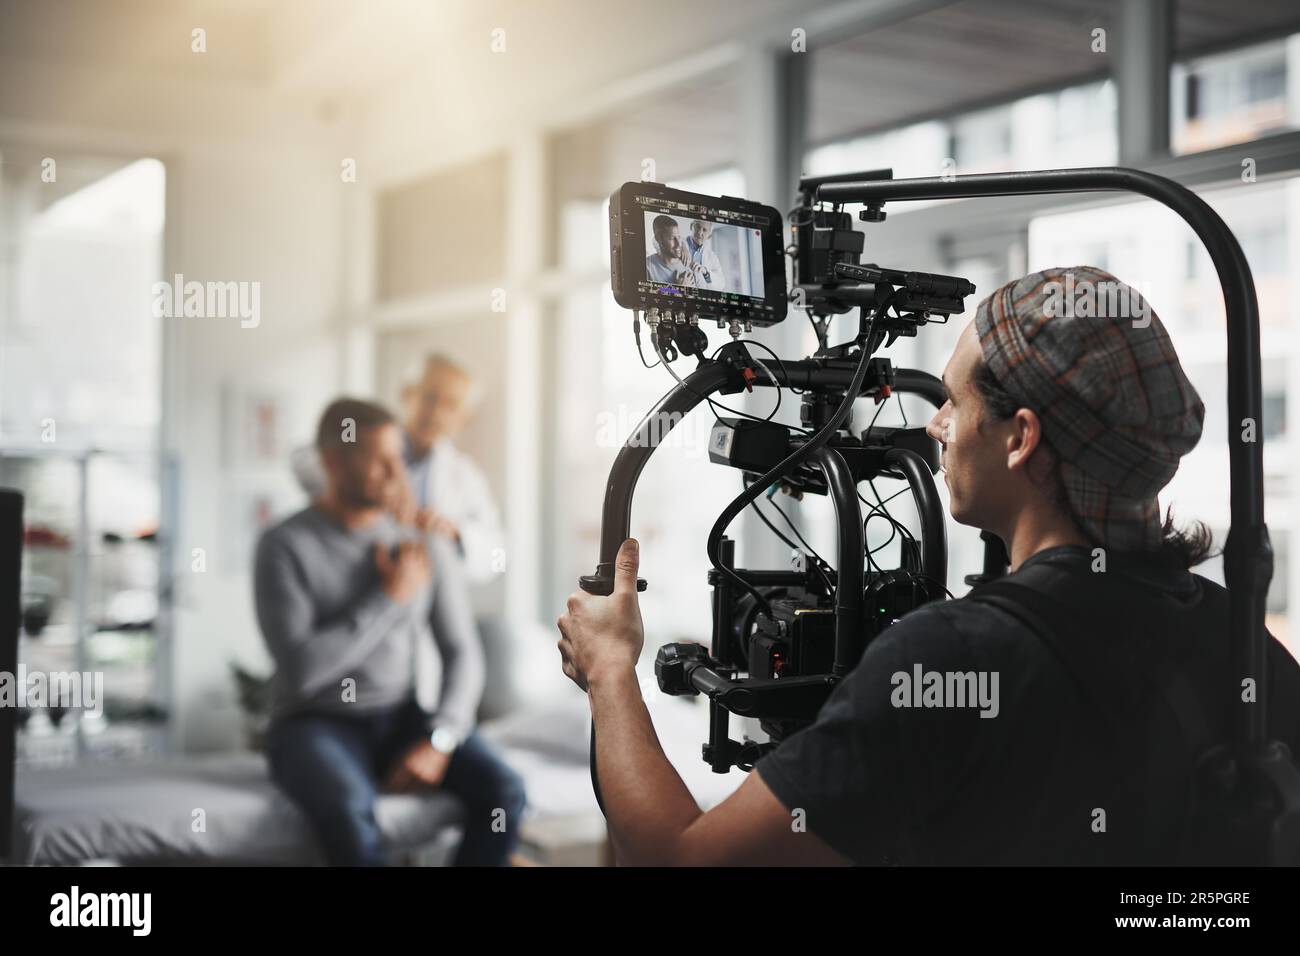 Getting the right shots. Behind the scenes shot of a camera operator shooting a scene with a state of the art camera inside of a studio during the day Stock Photo